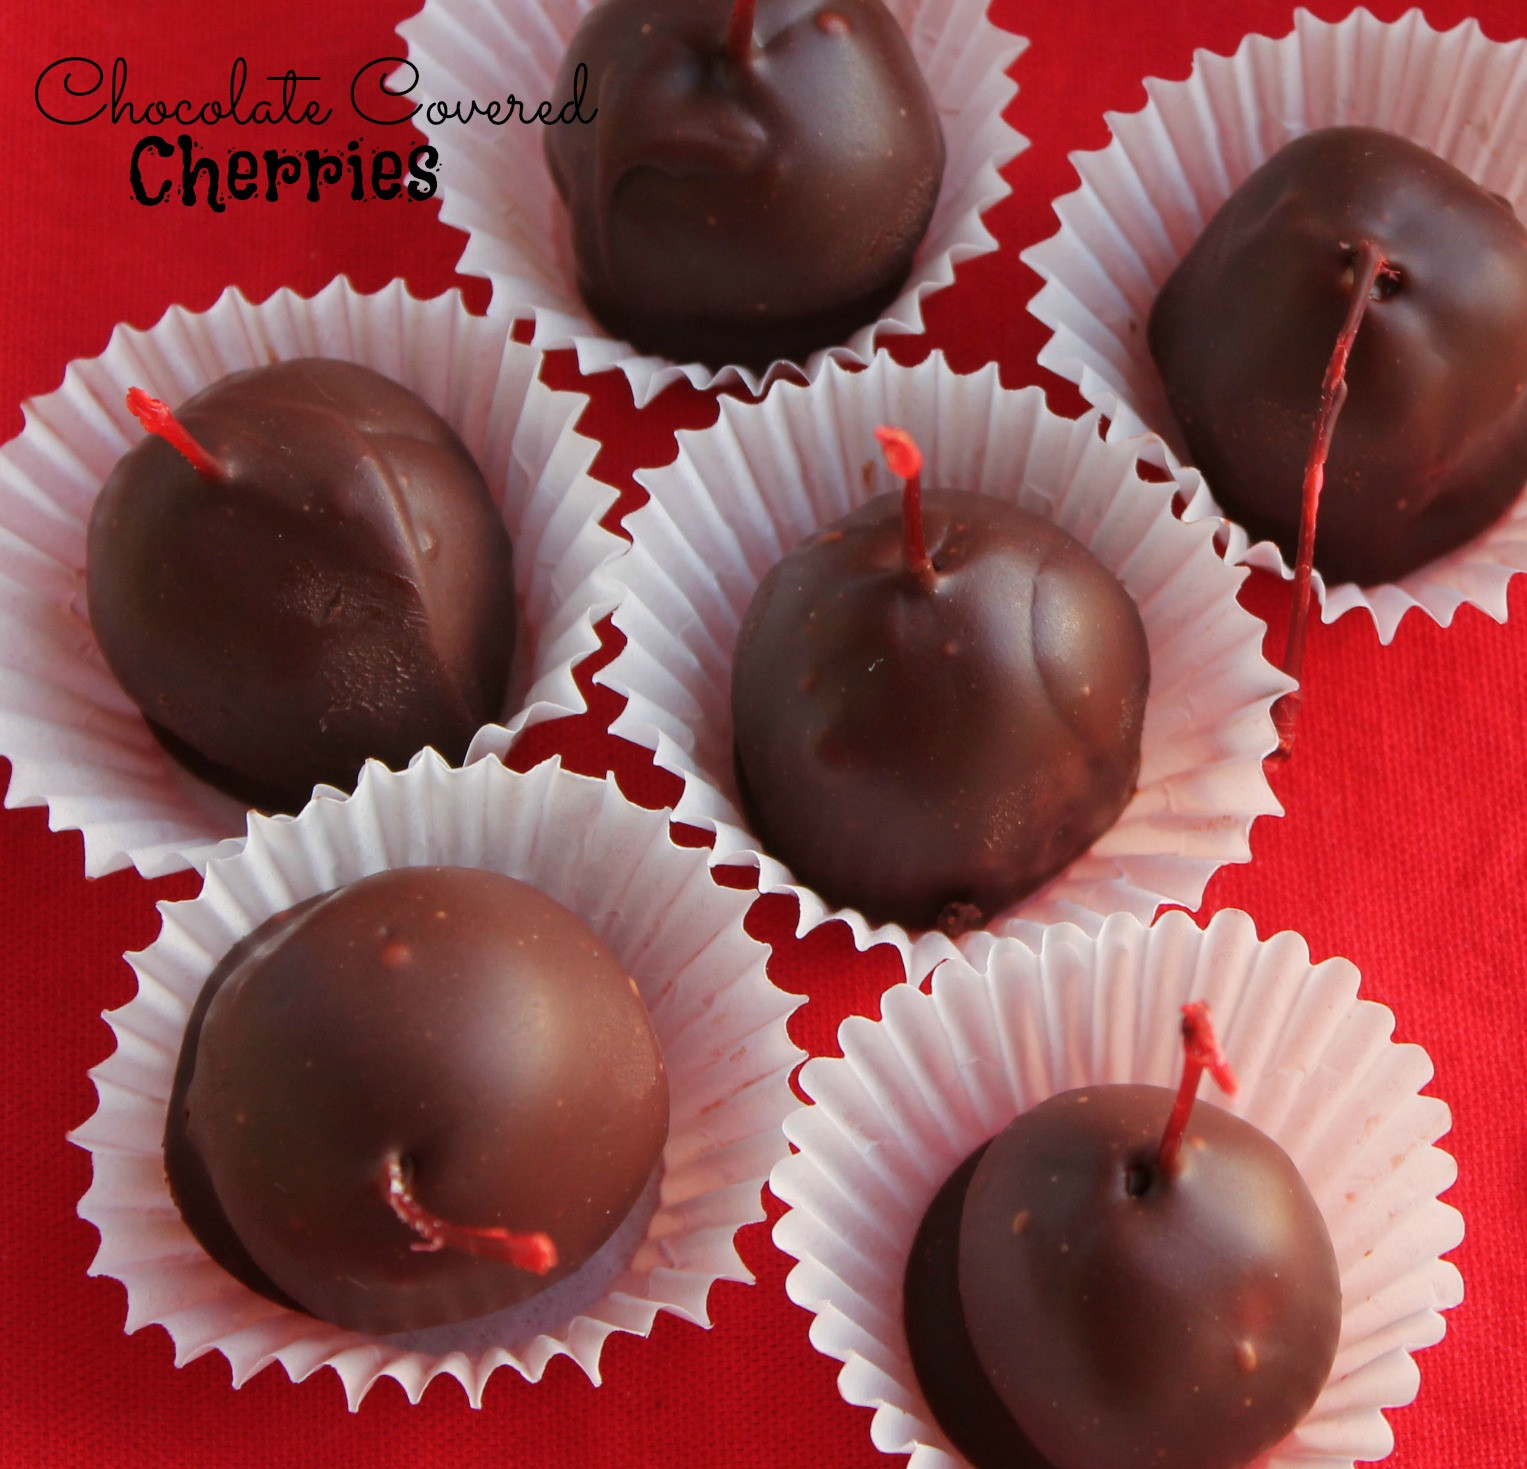 Chocolate Covered Cherry Recipes
 The EASIEST Chocolate Covered Cherries Recipe